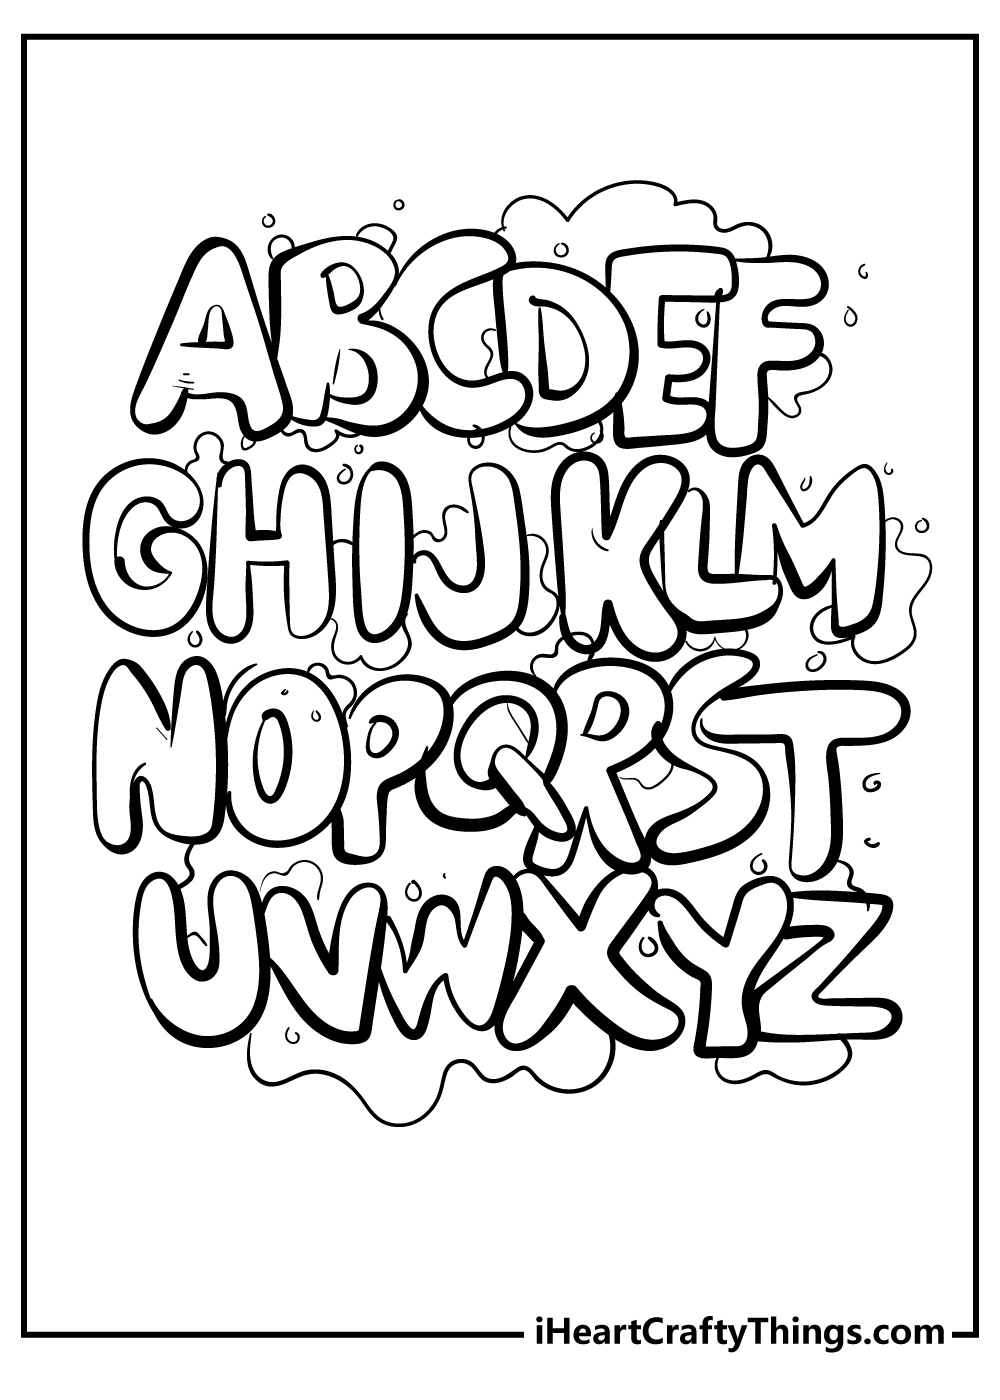 new alphabet coloring sheet free download